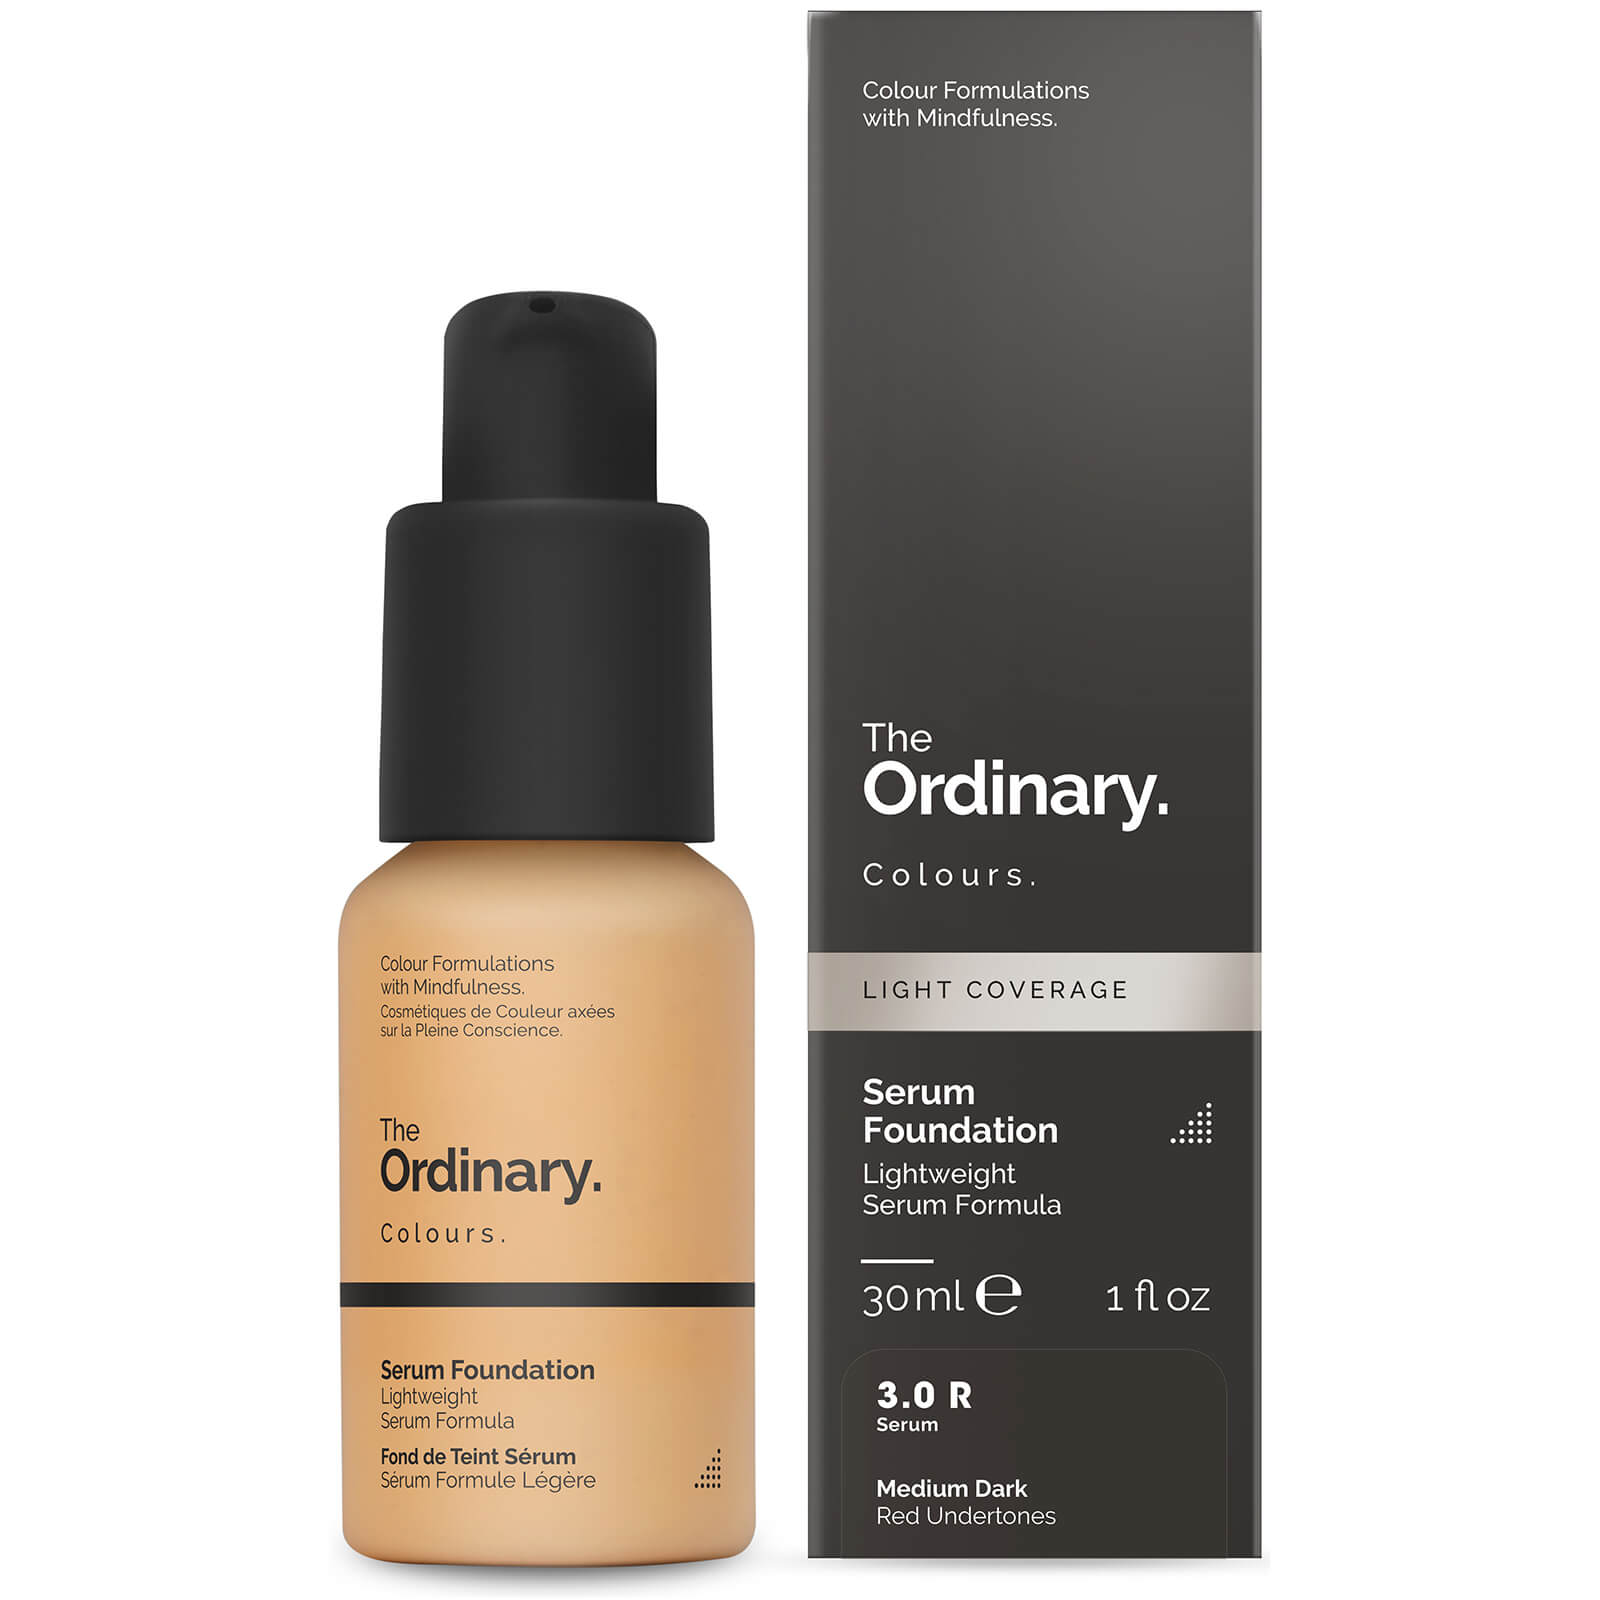 The Ordinary Serum Foundation with SPF 15 by The Ordinary Colours 30ml (Various Shades) - 3.0R